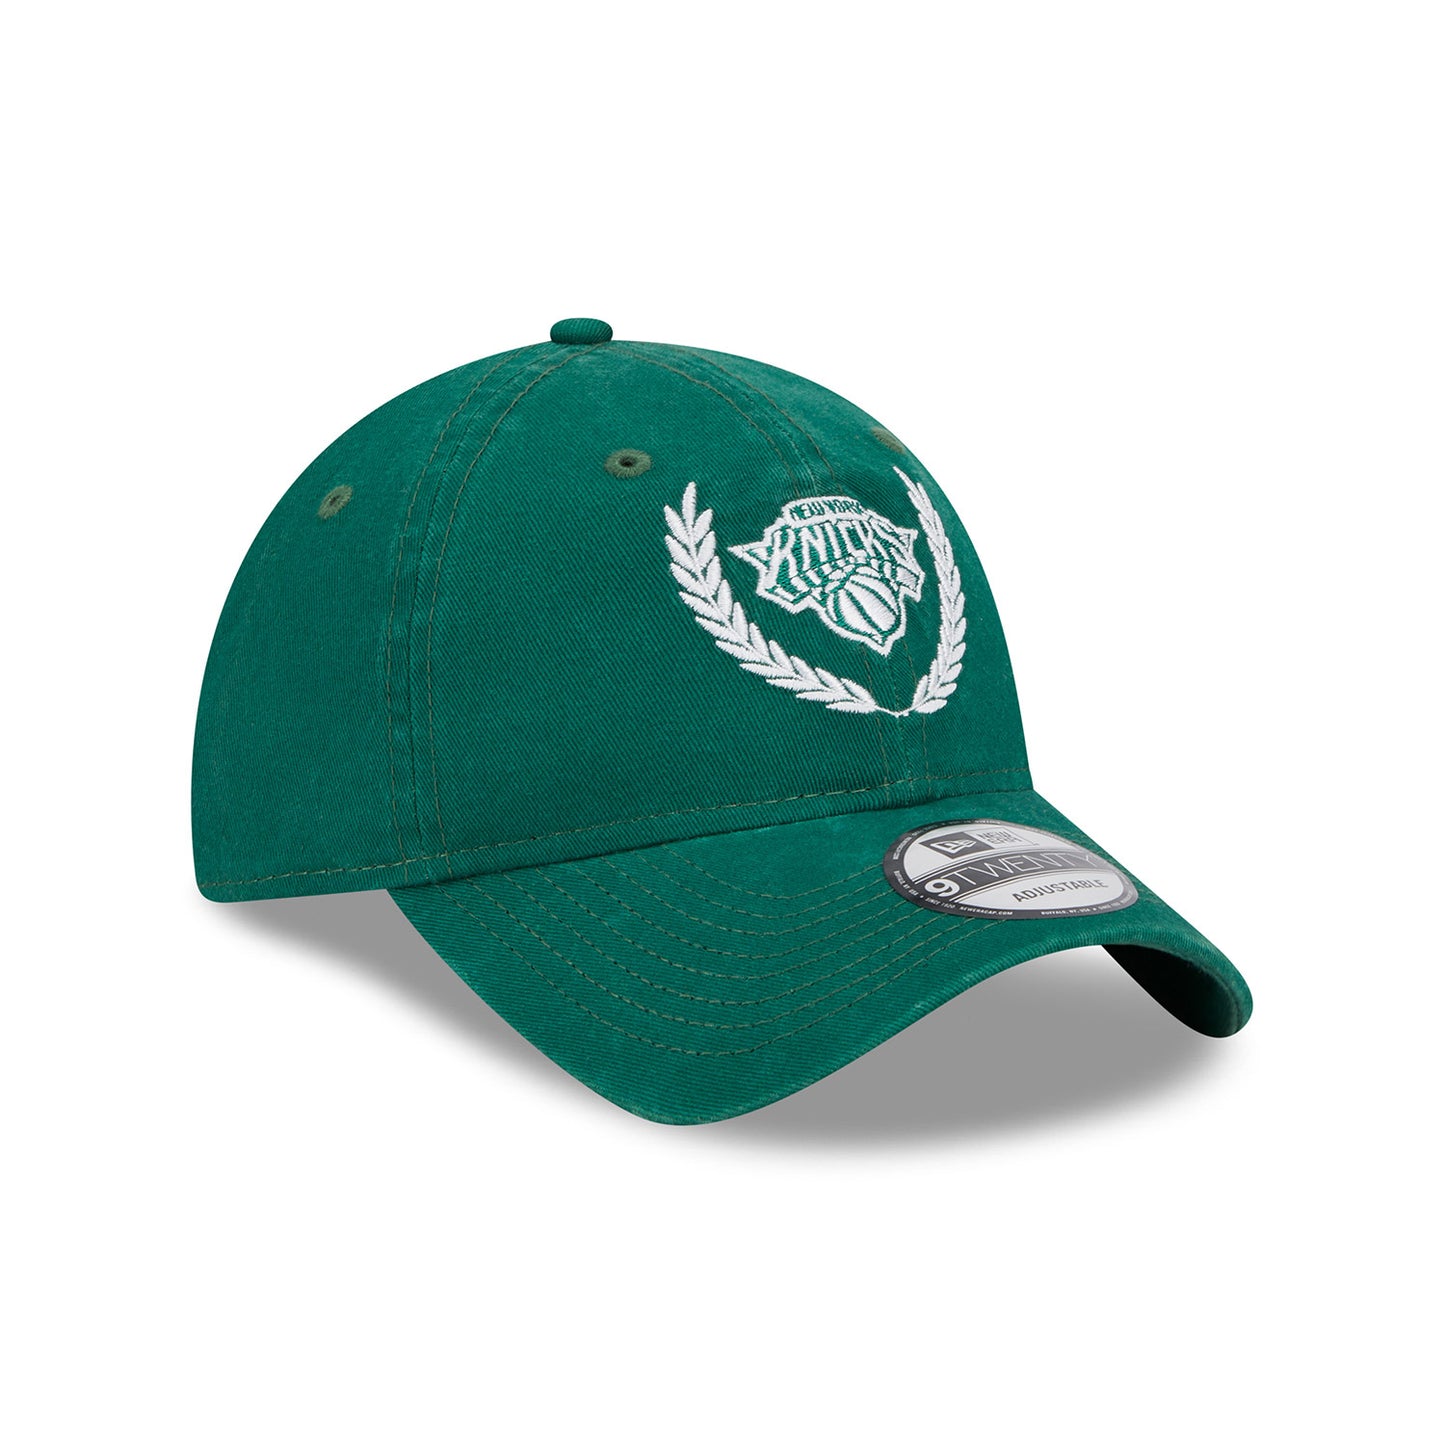 New Era Knicks Golf Emerald Green Leaves Adjustable Hat - Angled Right Side View